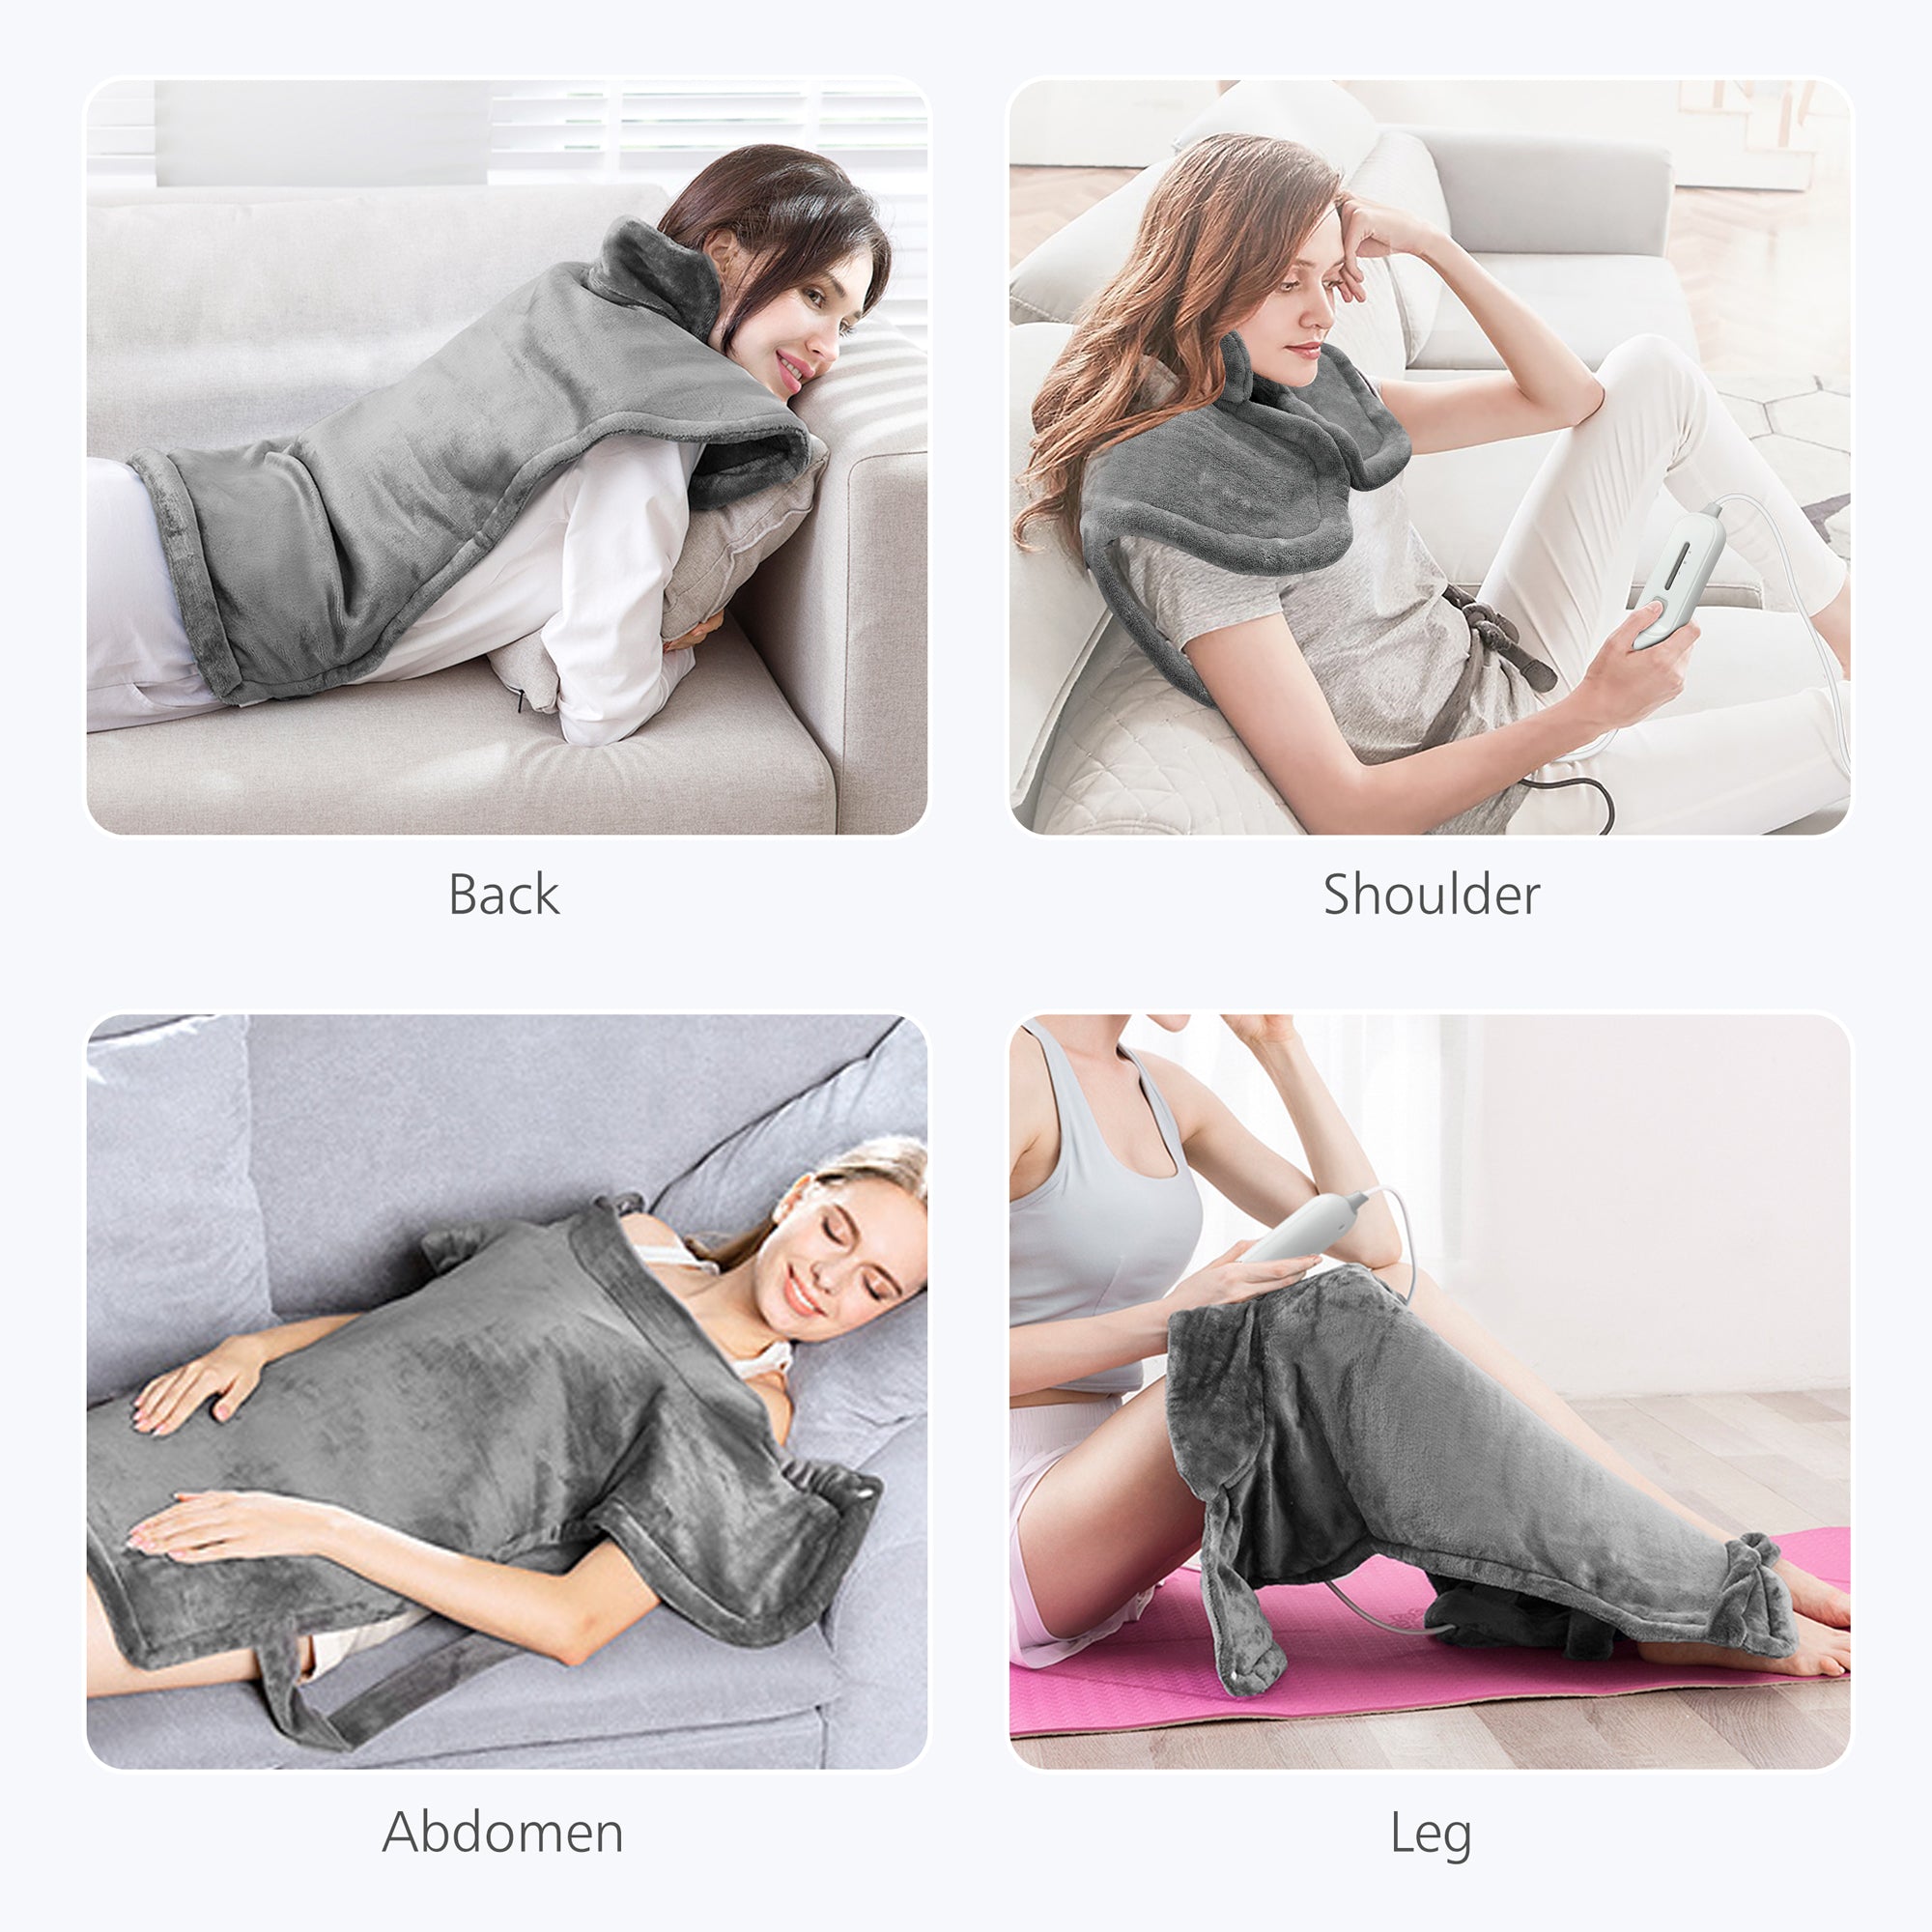 Comfier Soft Flannel Fast Heating Pads for Neck and Shoulders - H1822D